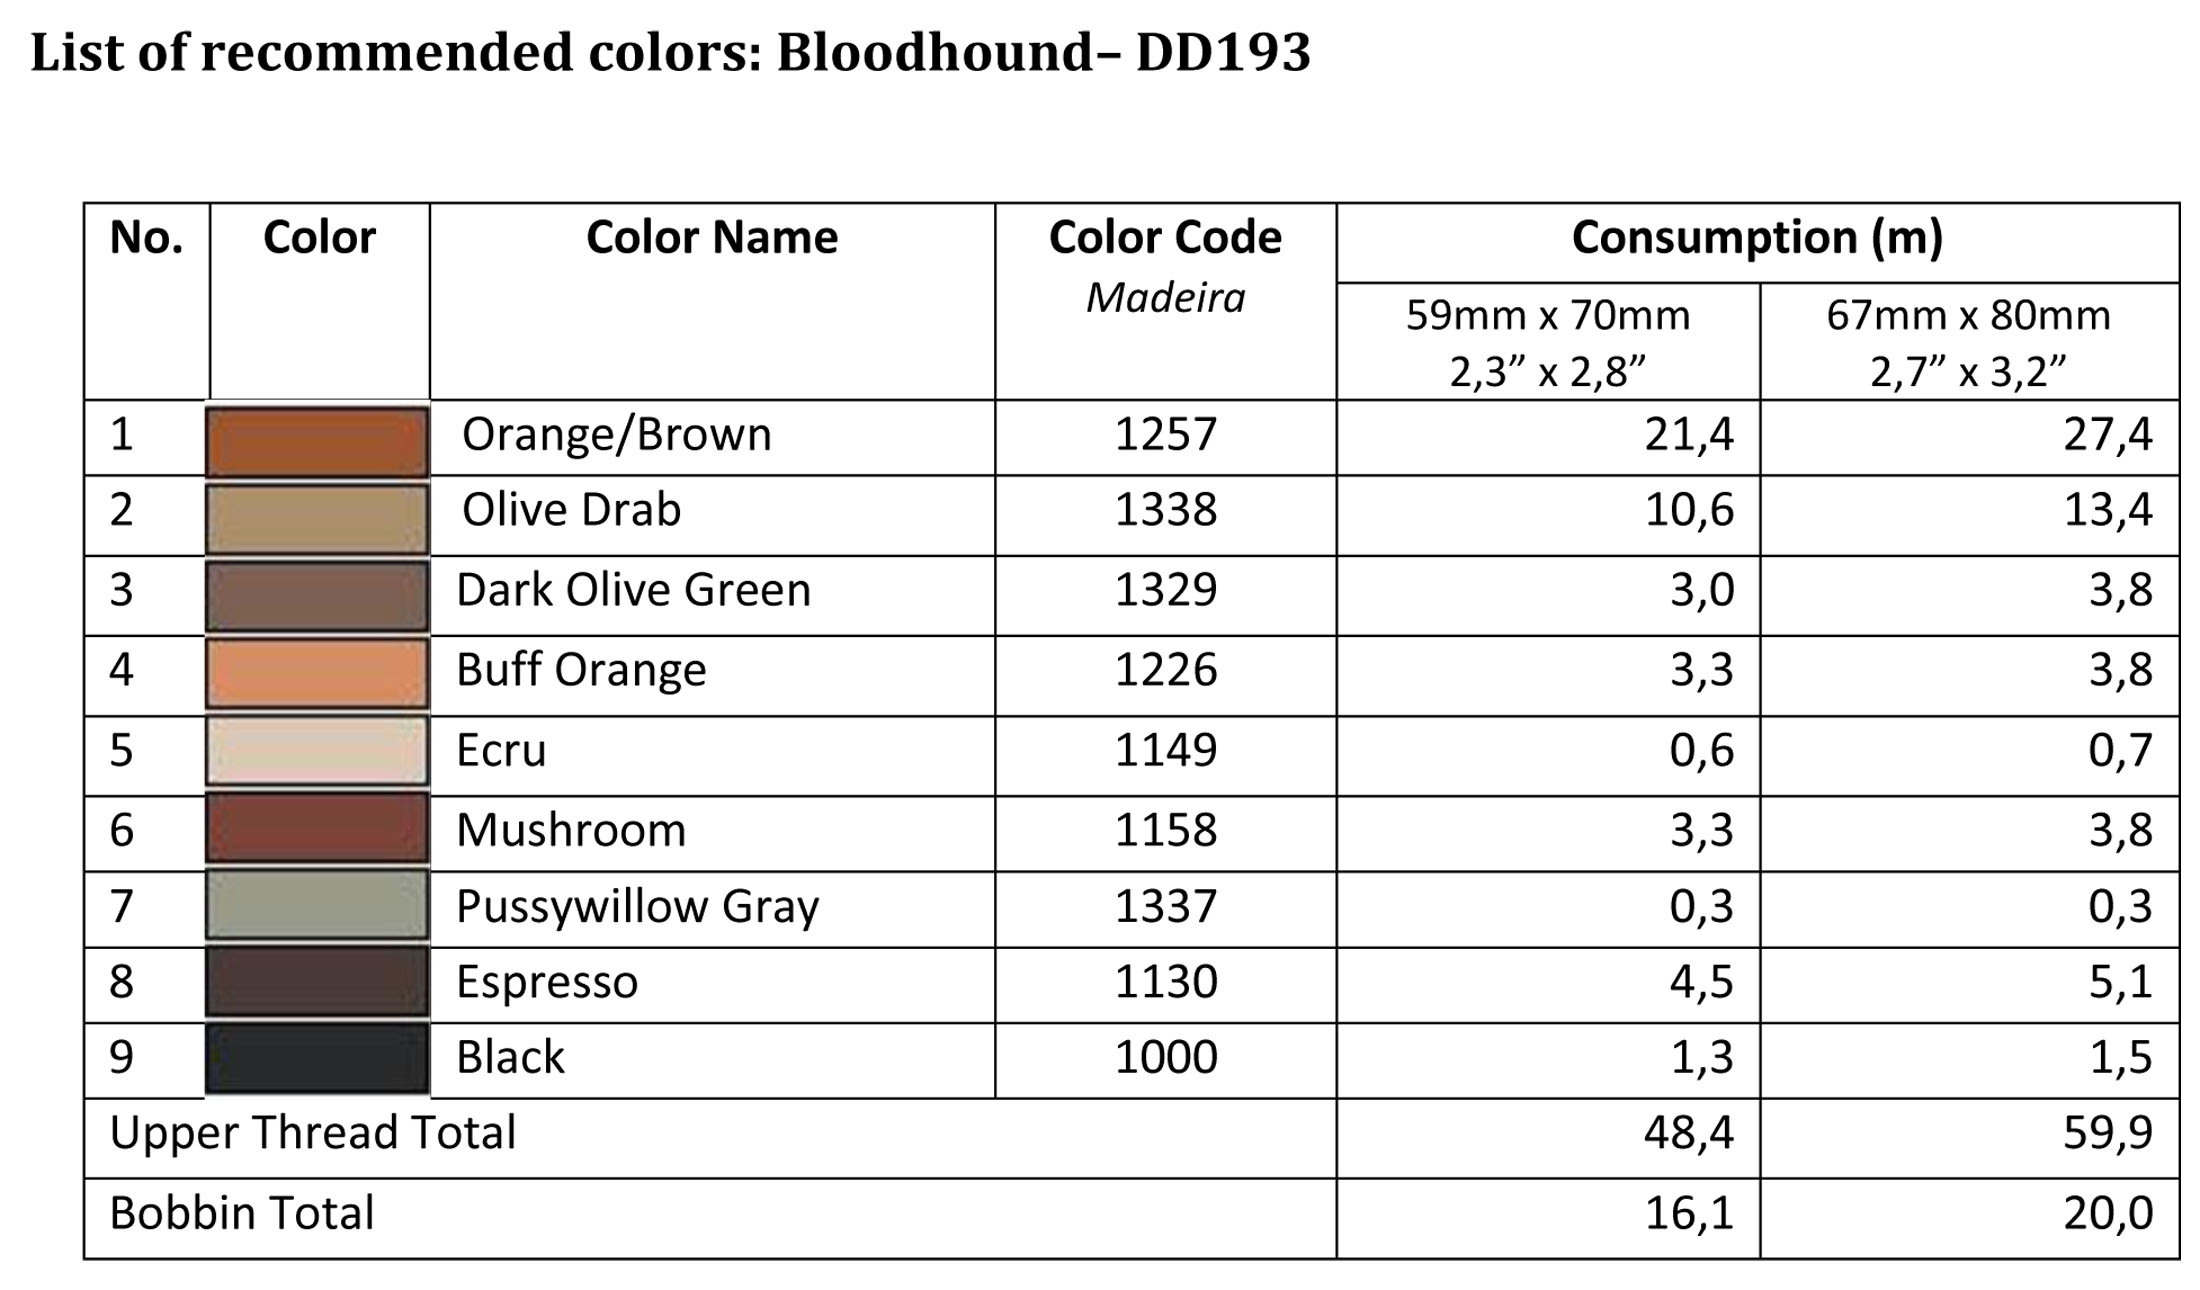 List of recommended colors - DD193